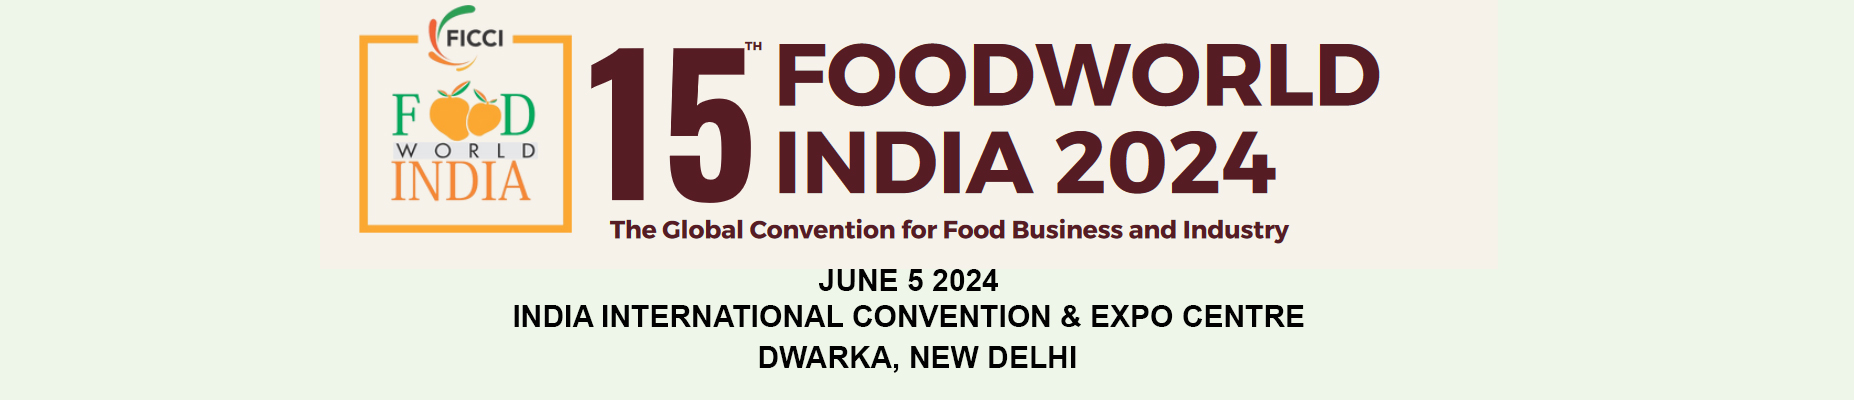 15th edition of FOODWORLD INDIA: The Global Convention for Food Business and Industry